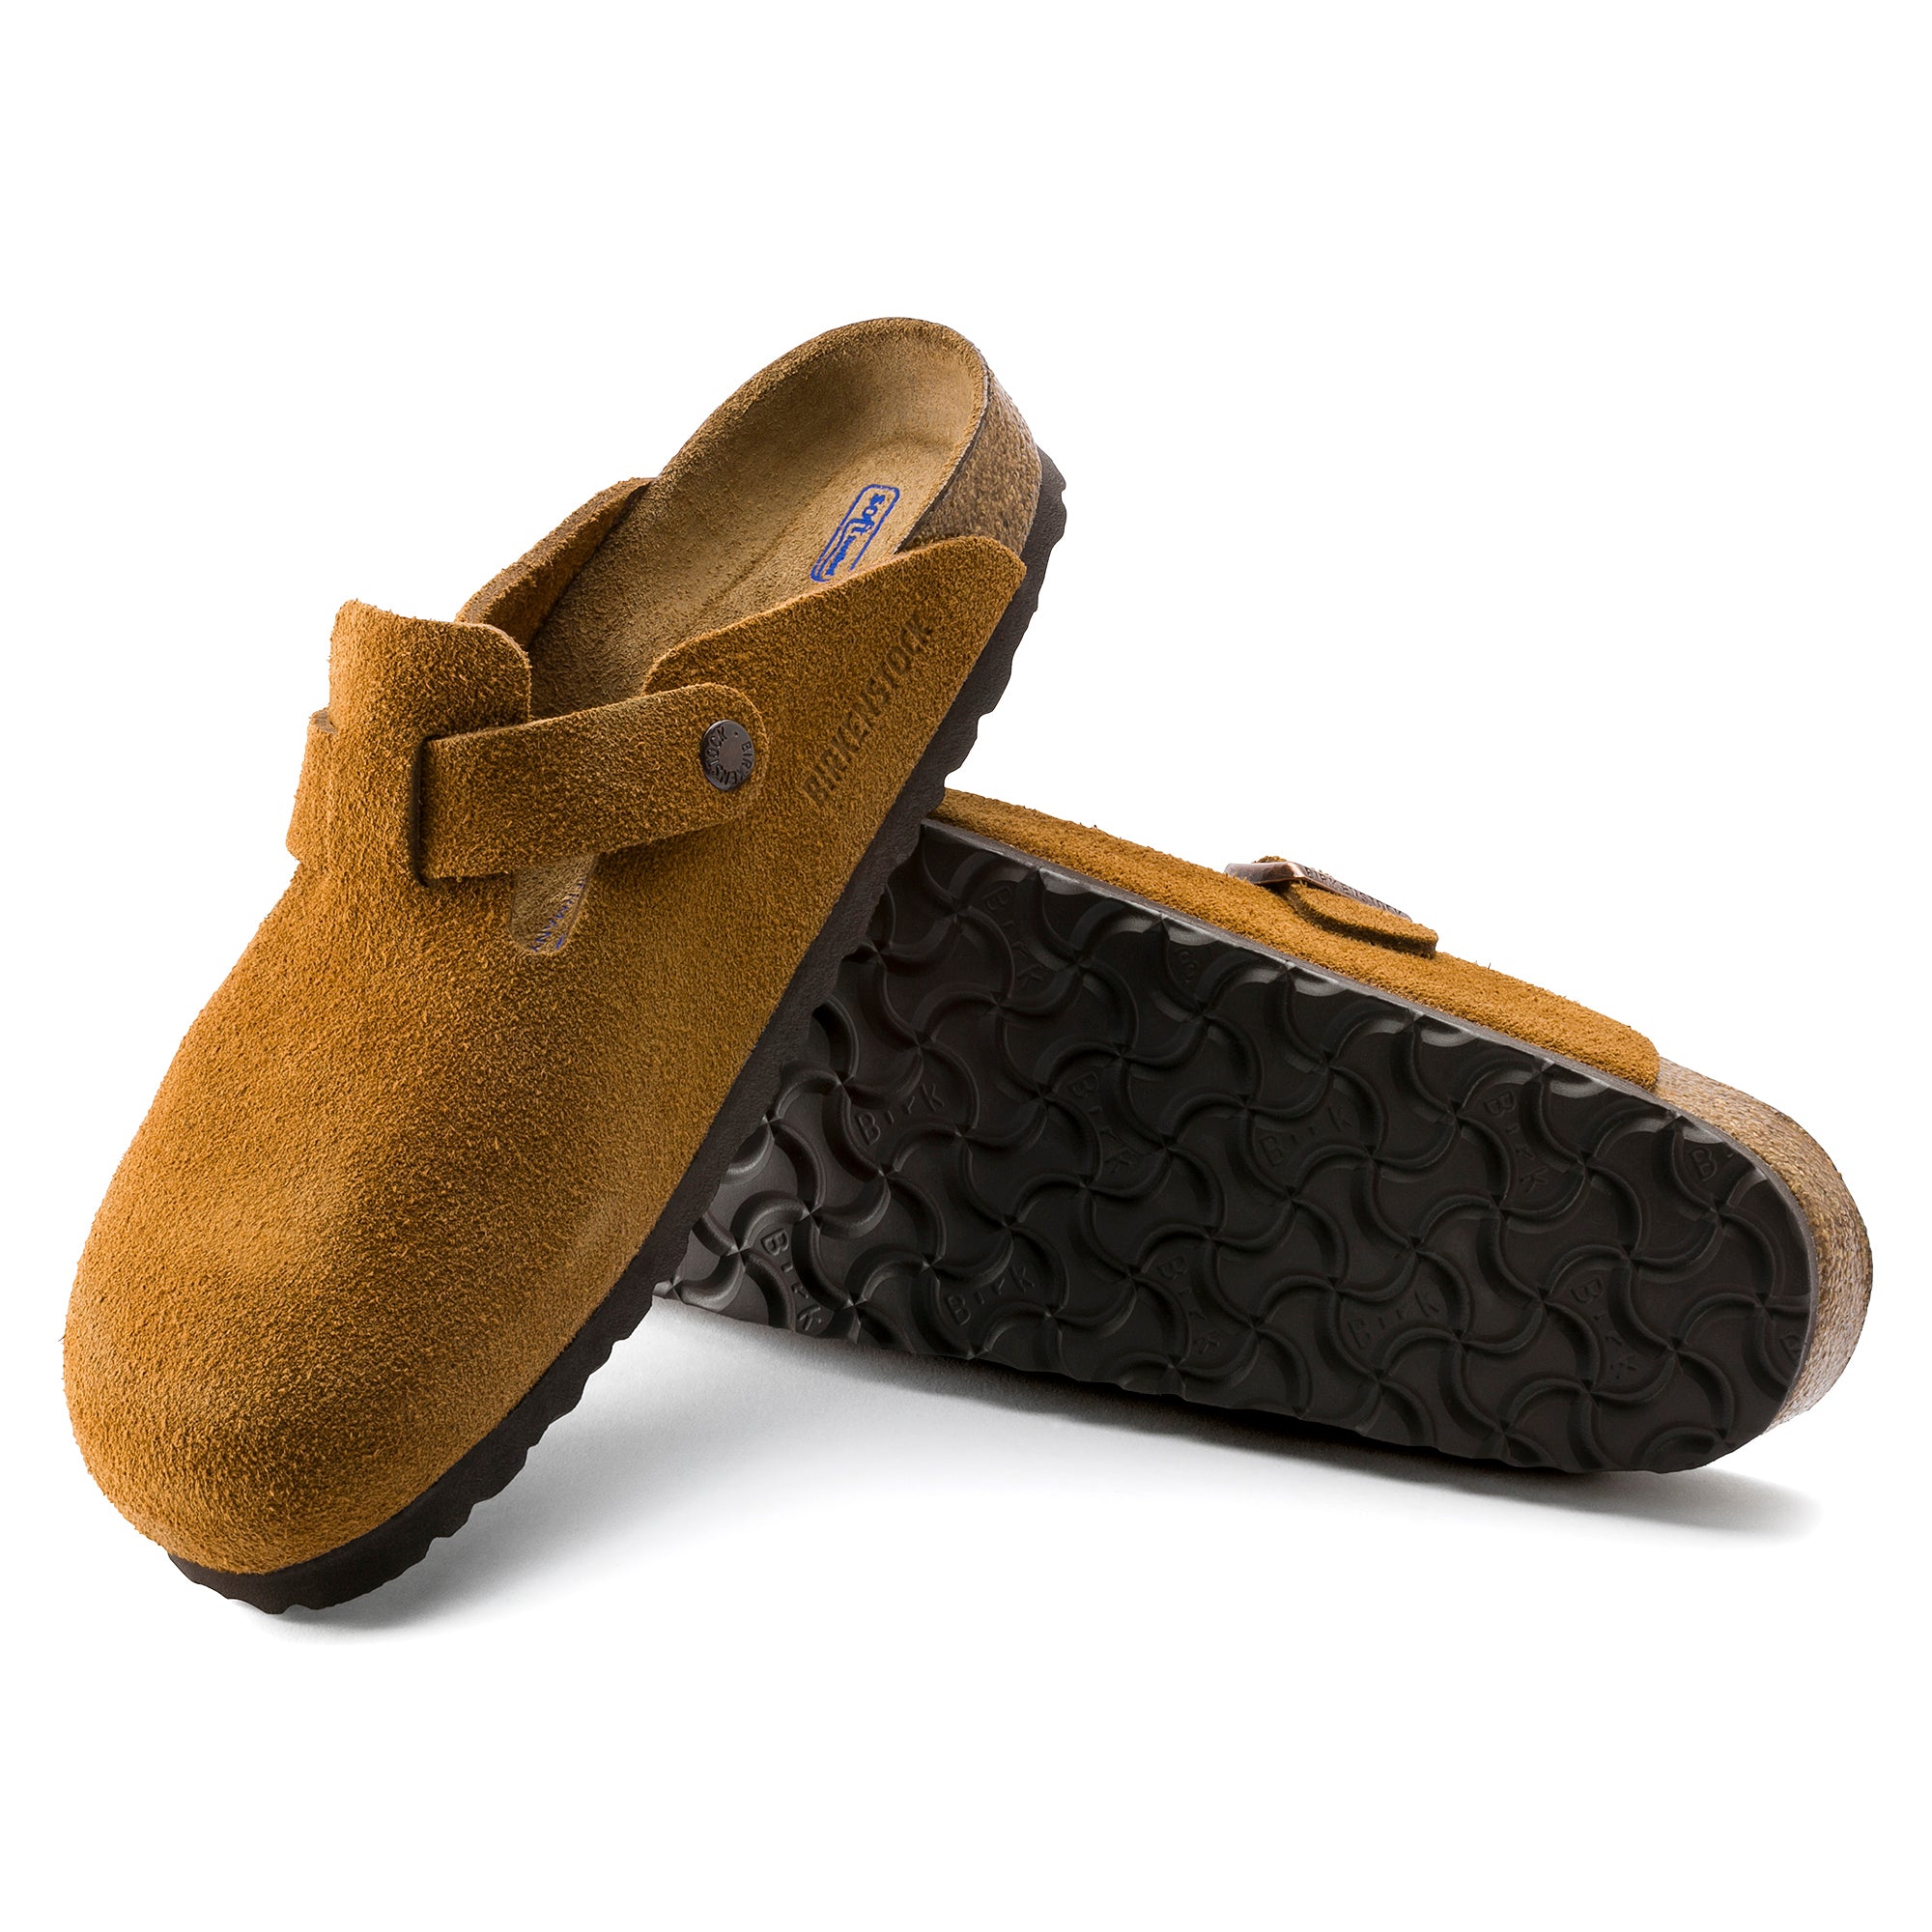 Boston Suede Leather in Mink (Soft Footbed)